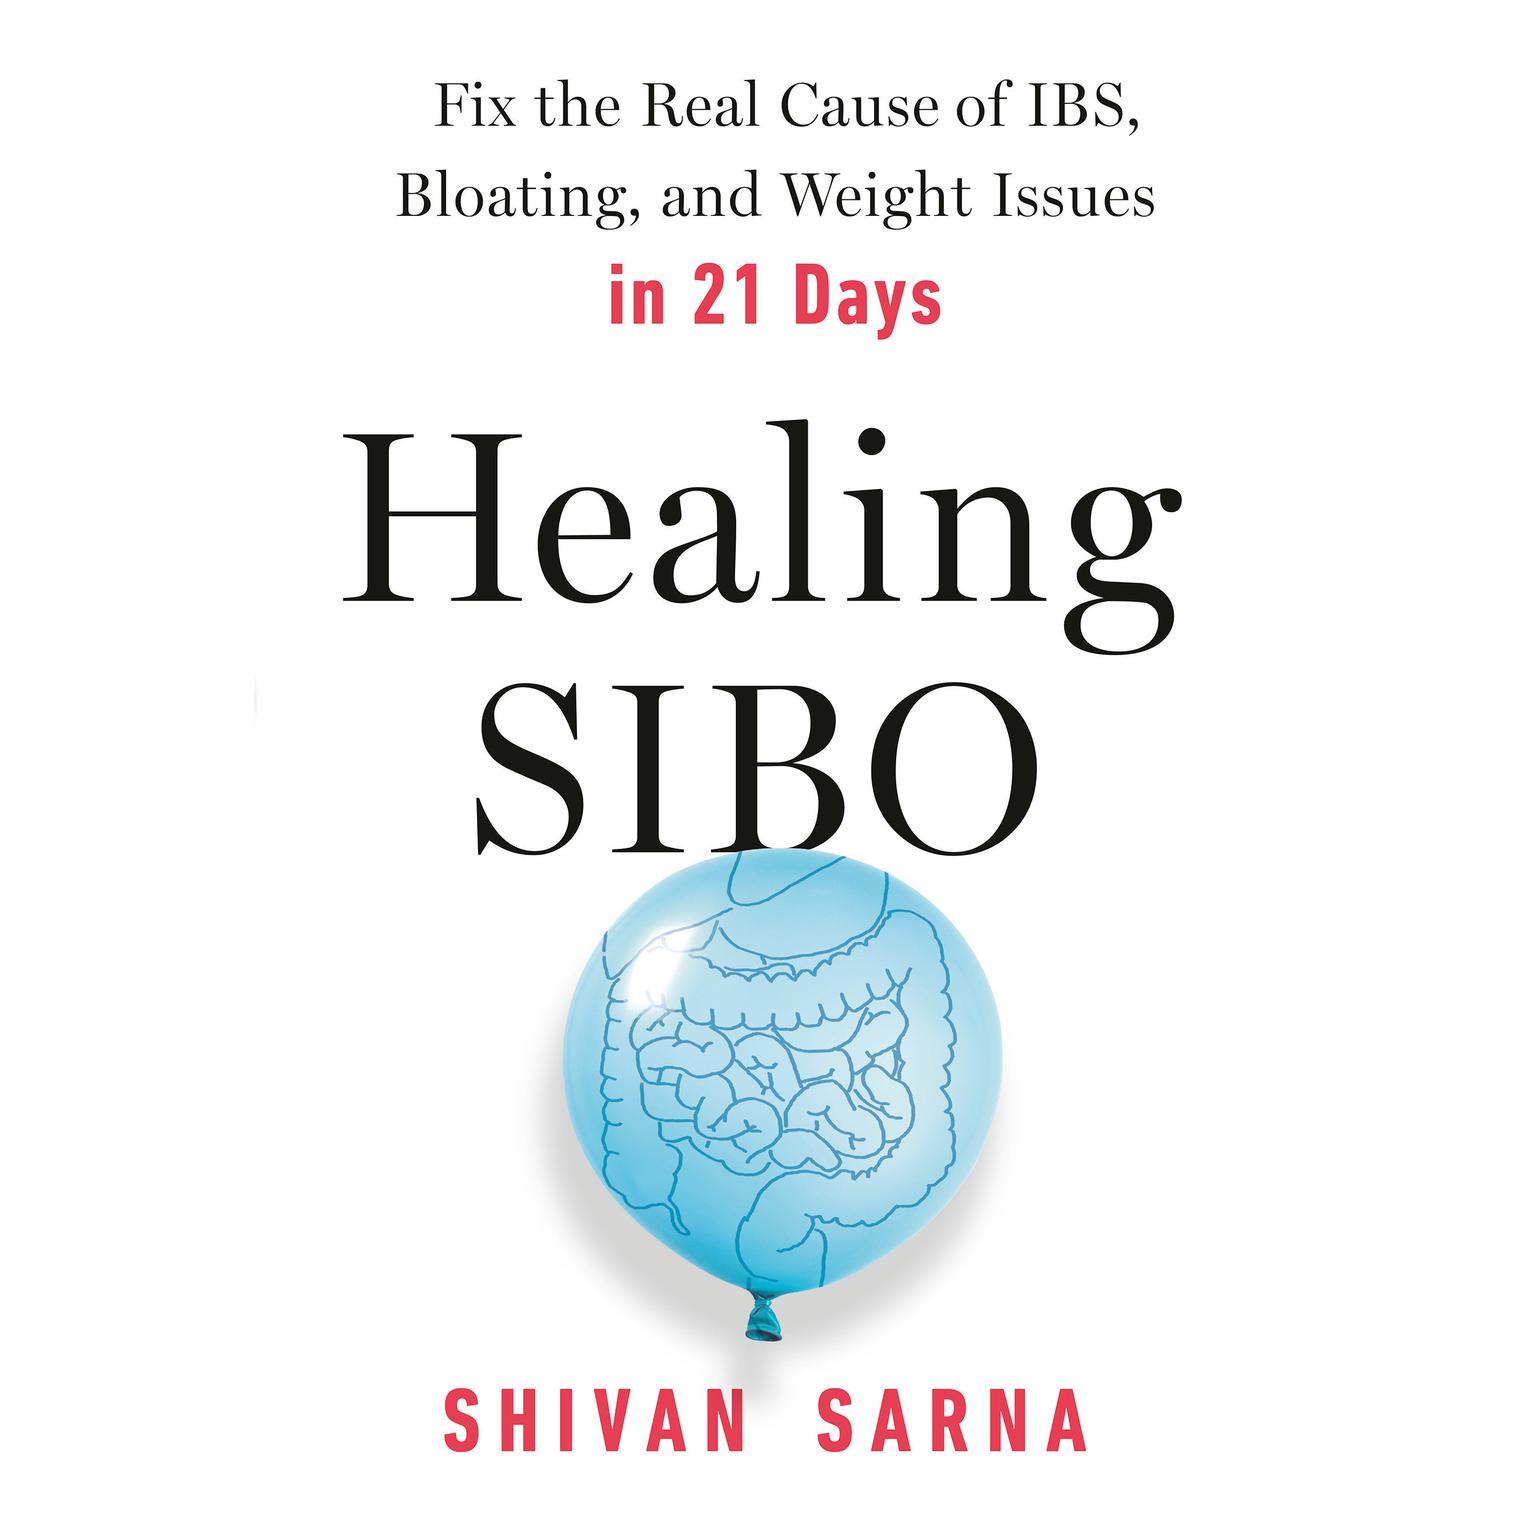 Healing Sibo: Fix the Real Cause of IBS, Bloating, and Weight Issues in 21 Days Audiobook, by Shivan Sarna